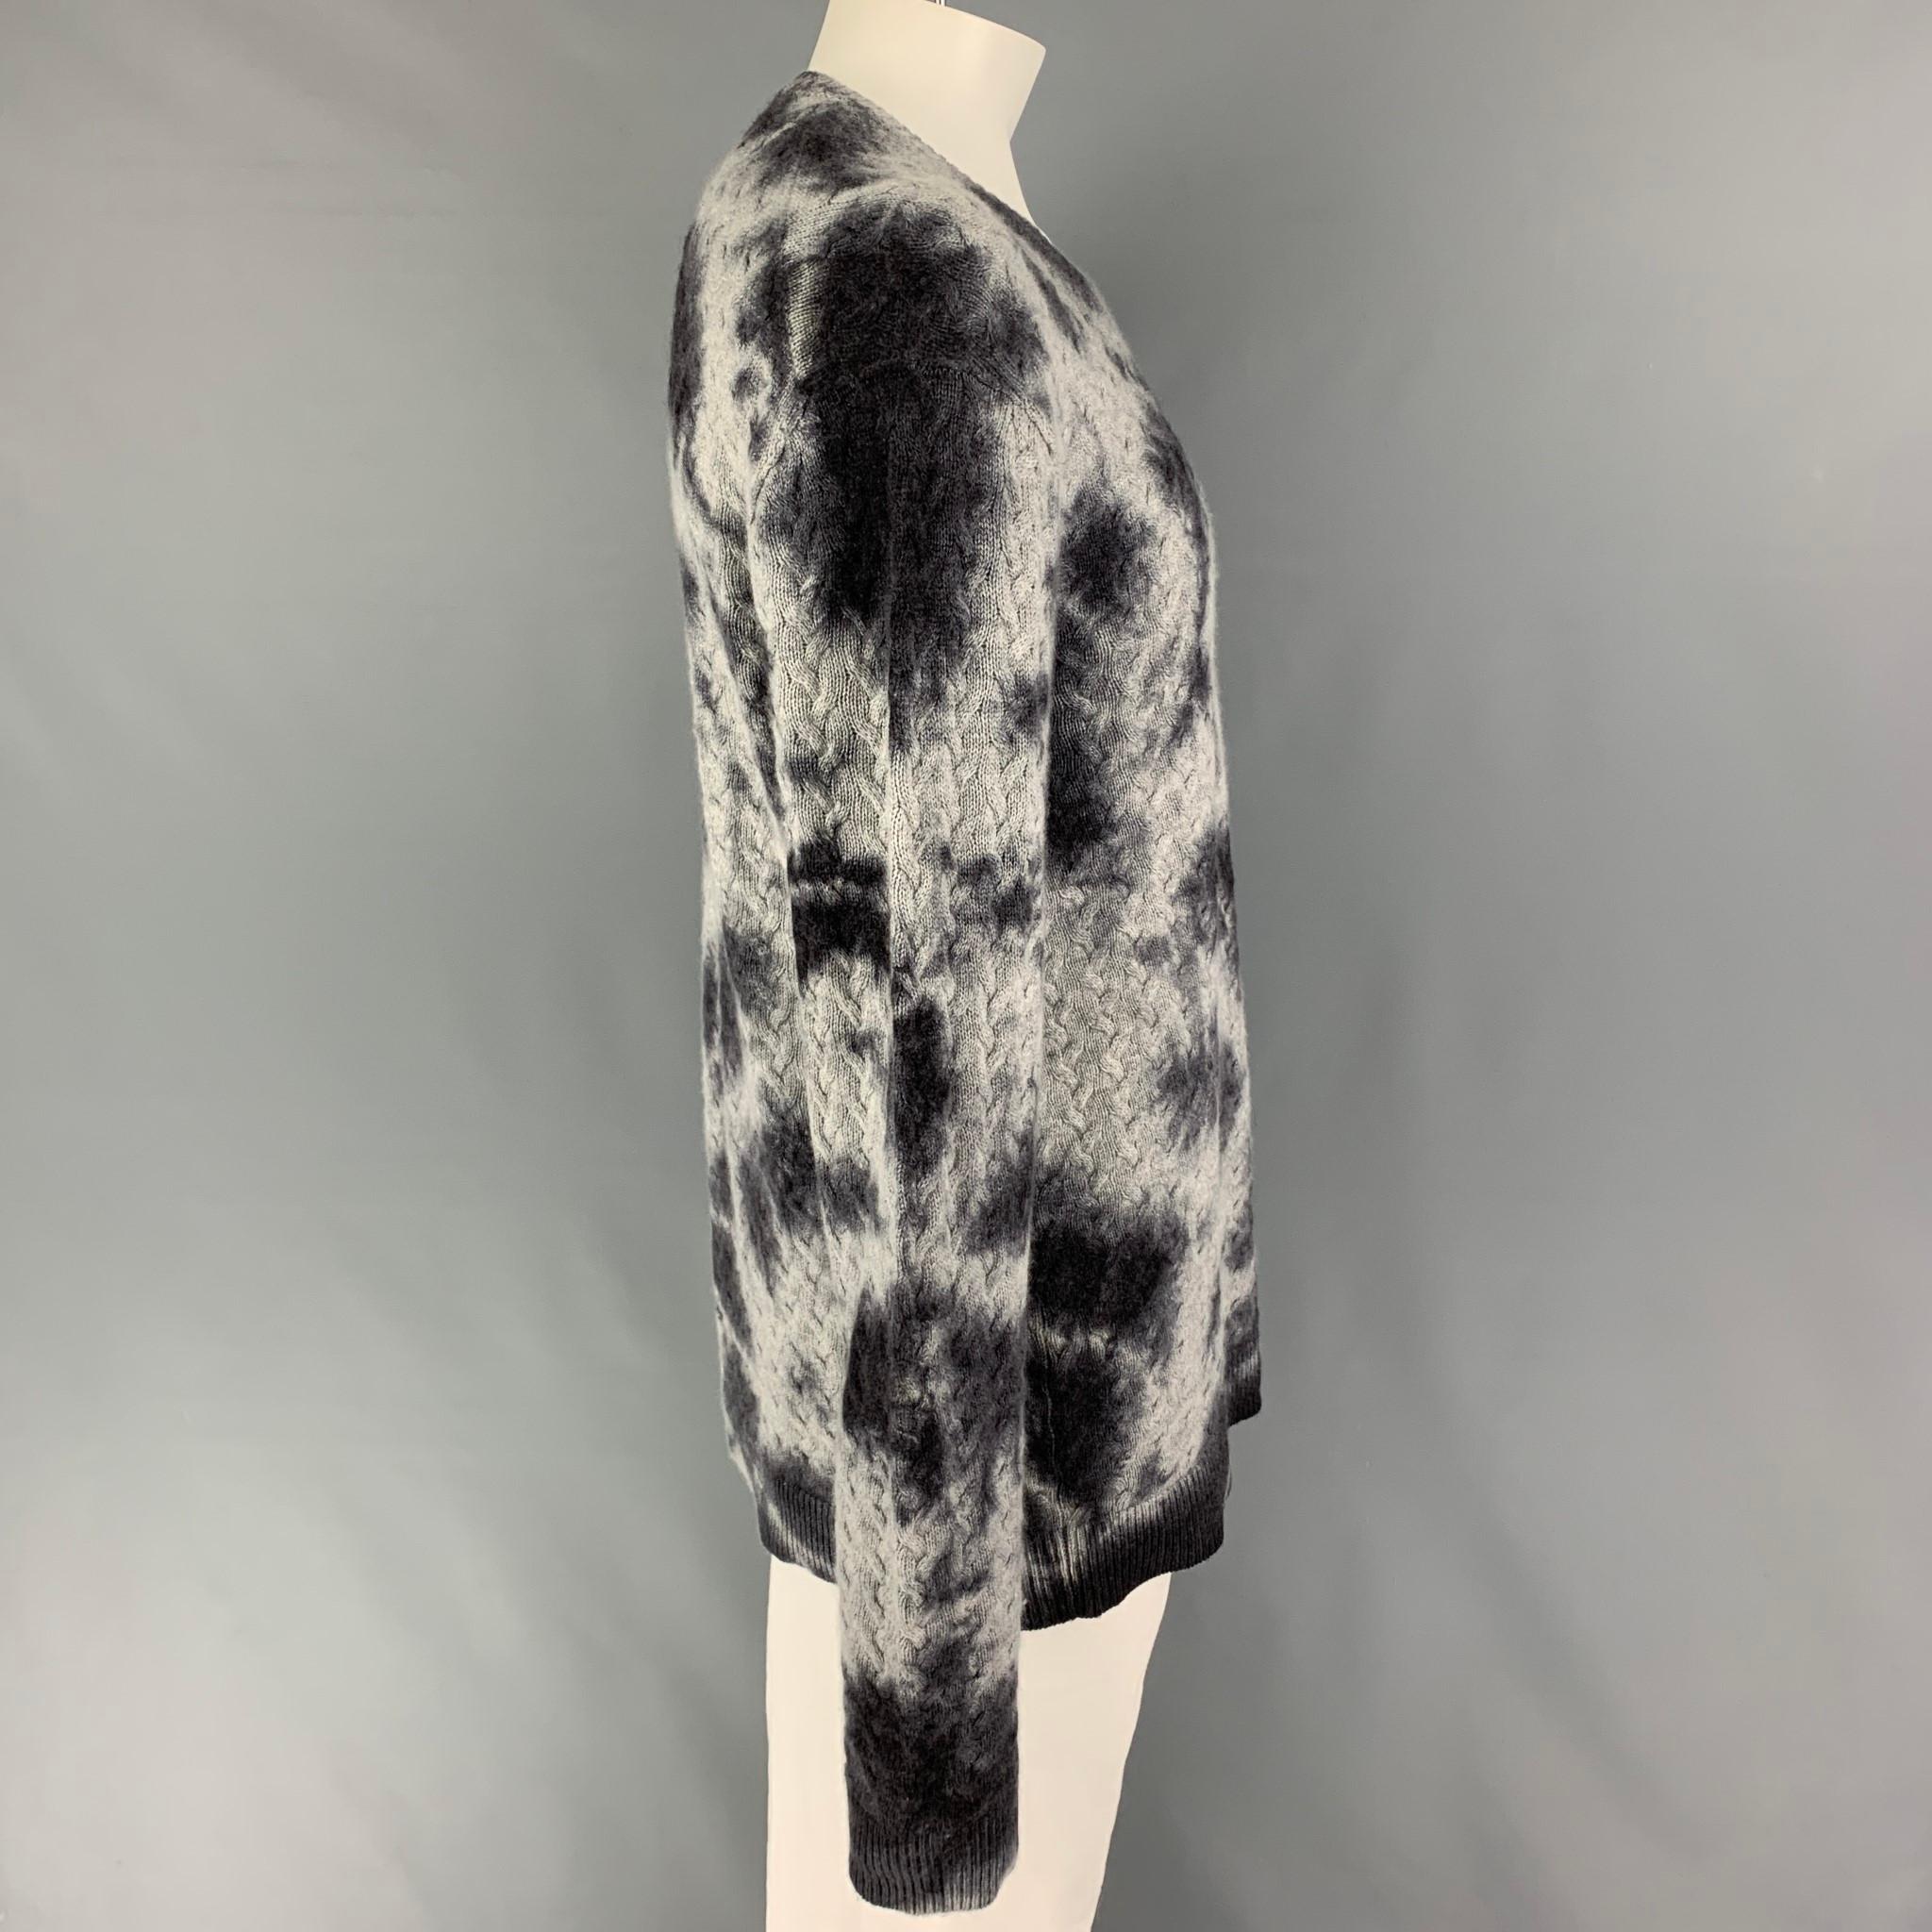 JOHN VARVATOS pullover comes in a grey & black tie dye cable knit wool / cashmere featuring a crew-neck.

Very Good Pre-Owned Condition.
Marked: XL

Measurements:

Shoulder: 23 in.
Chest: 46 in.
Sleeve: 30 in.
Length: 31 in.